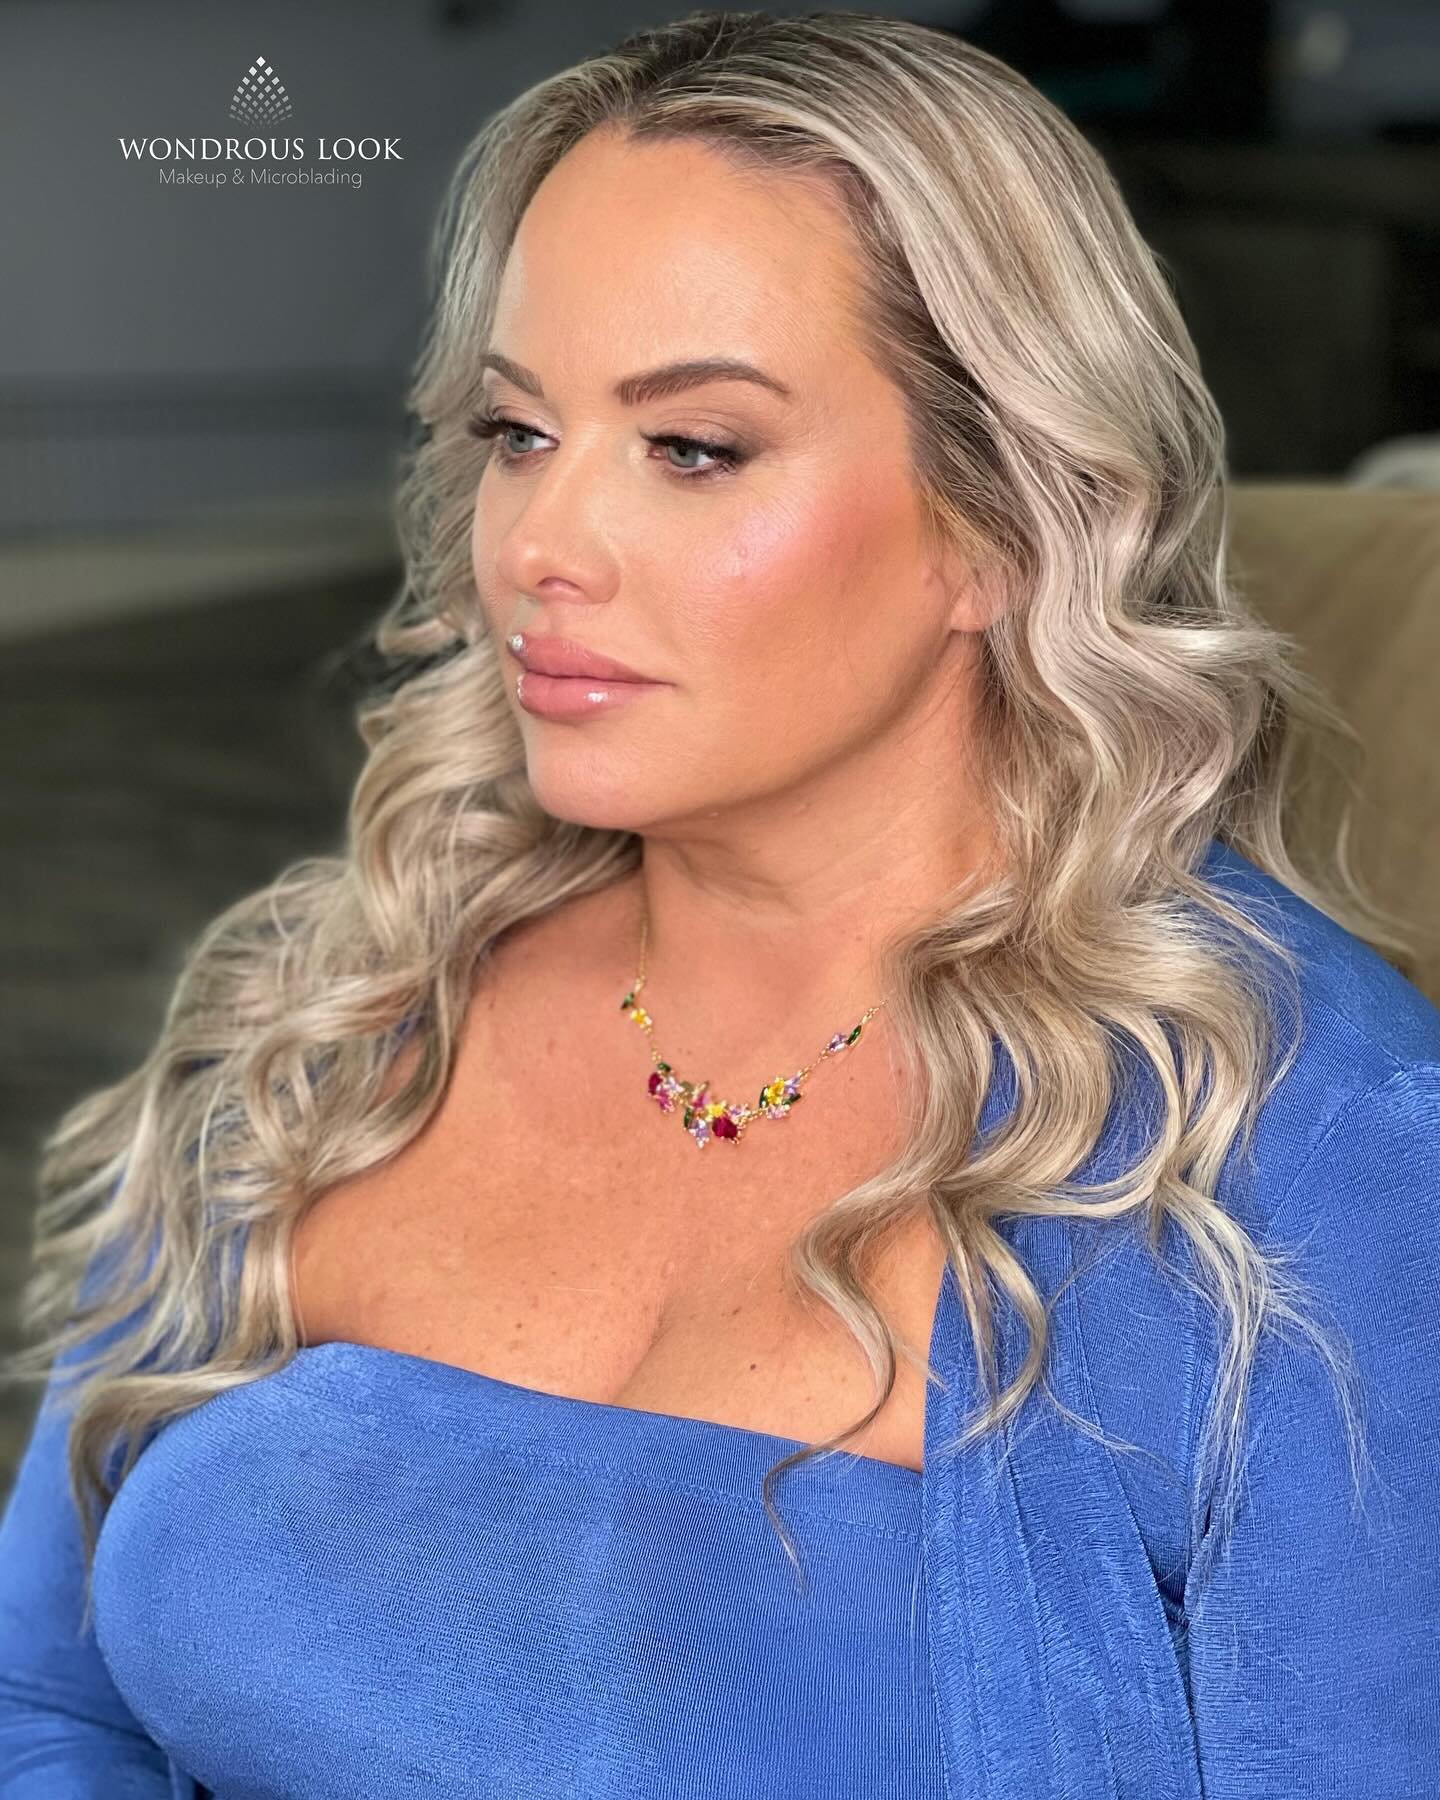 Waves and soft natural look for her baby shower 🤍🤍
Hair and makeup services @wondrouslookmakeup 
#miamimakeupartist #miamihairstylist #softglammakeup #waveshair 
Hair @beautybyvaniavasquez 
Makeup Carolina CEO of @wondrouslookmakeup